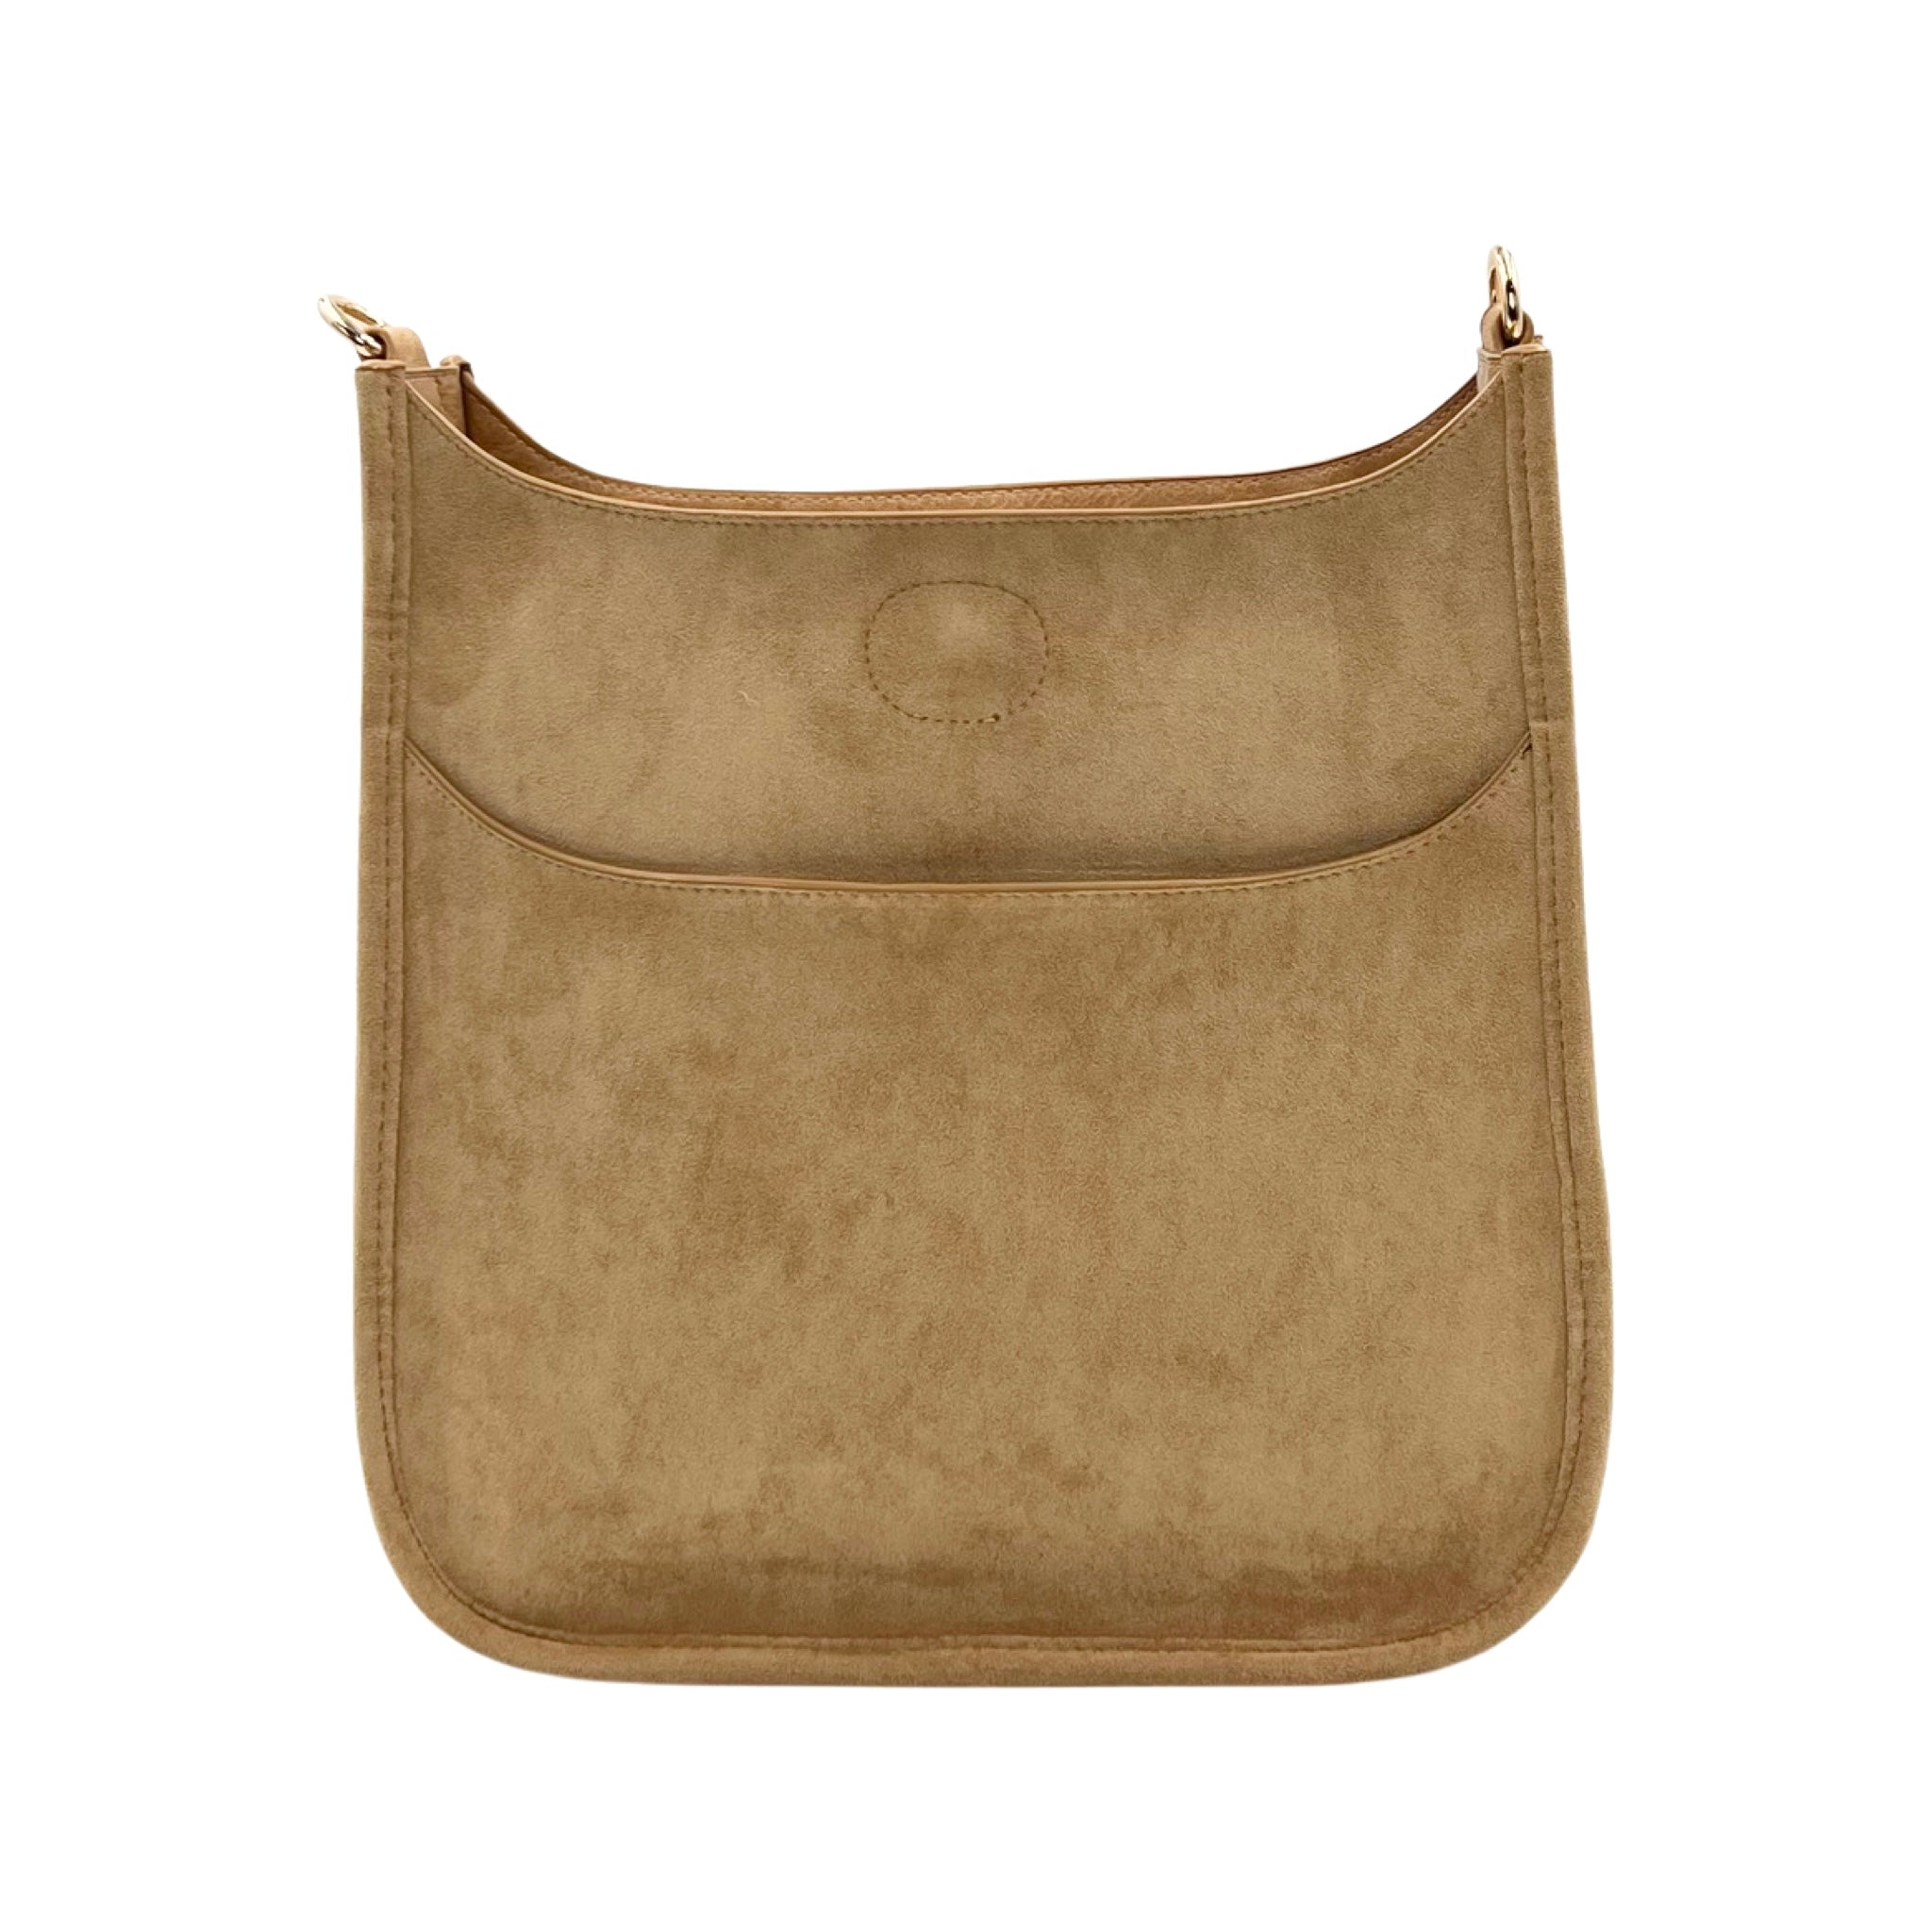 Ahdorned! Camel/ Faux Leather/ crossbody Bag Gold Hardware With Two Straps.